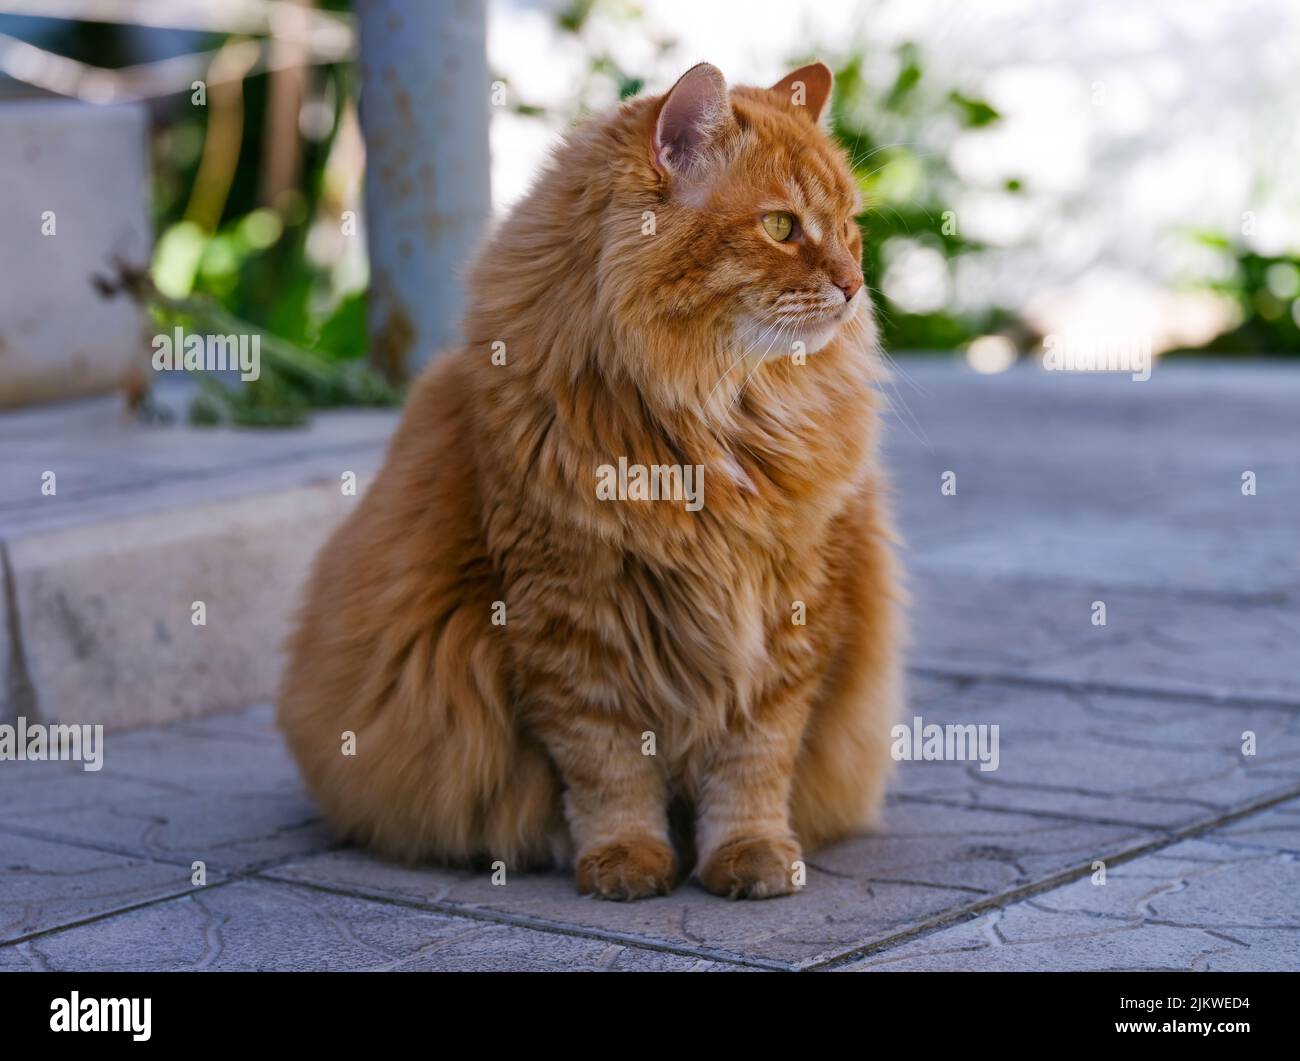 A Ginger cat seating outdoors. Stock Photo